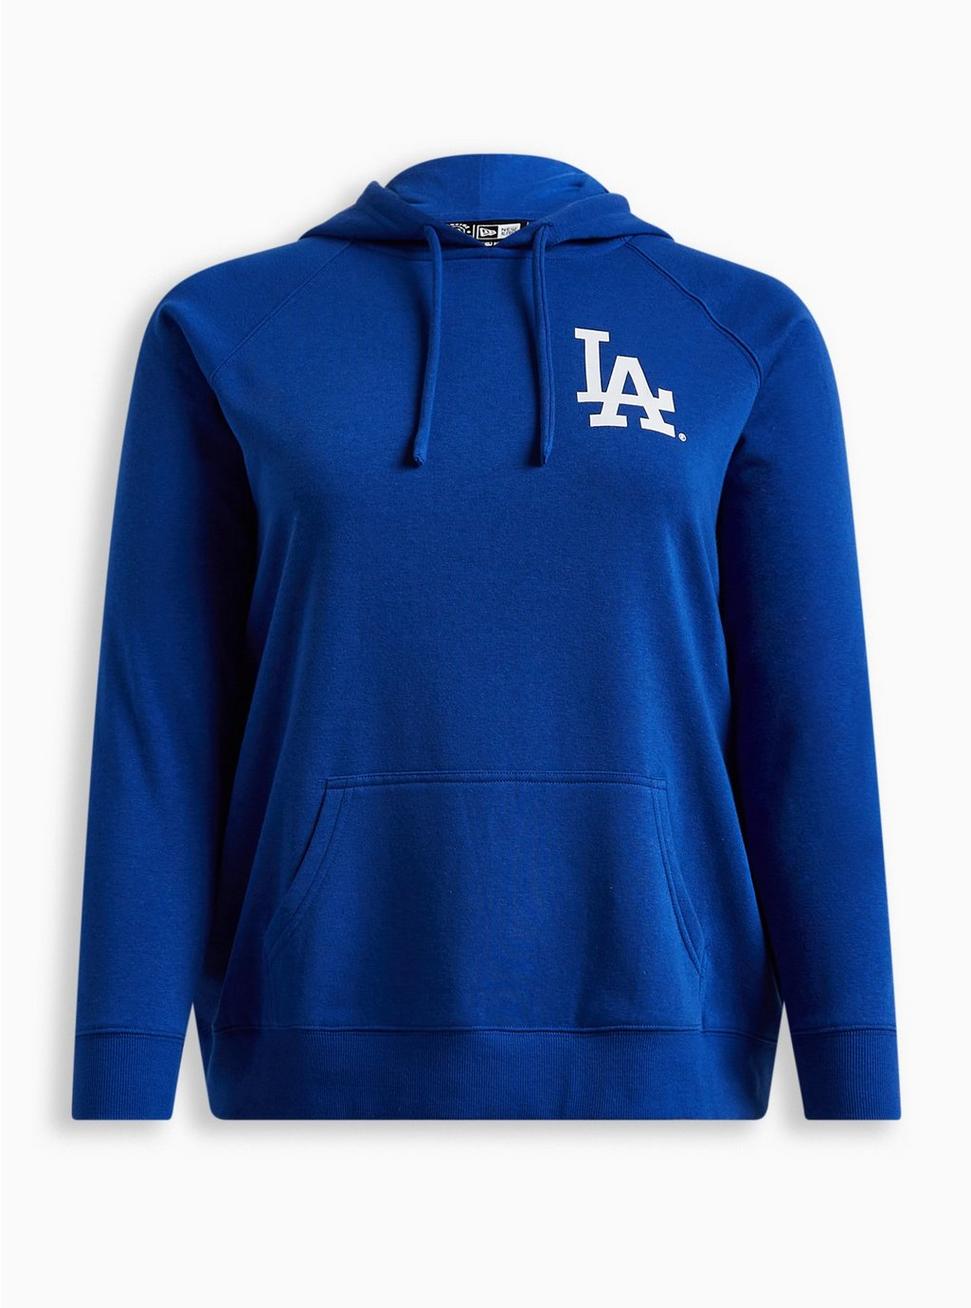 dodger sweaters on sale